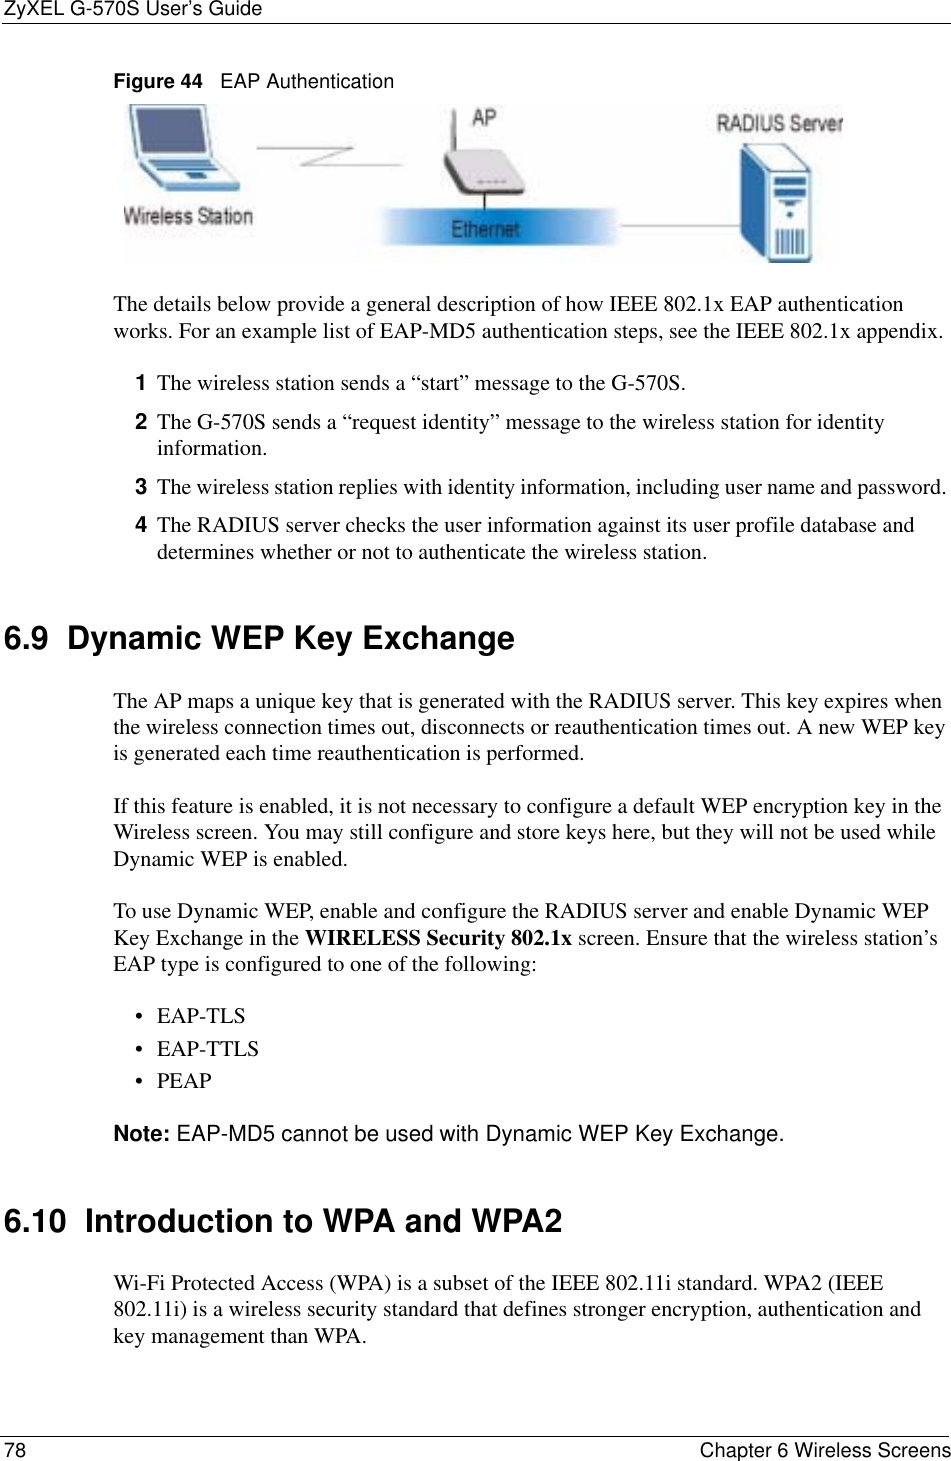 ZyXEL G-570S User’s Guide78 Chapter 6 Wireless ScreensFigure 44   EAP AuthenticationThe details below provide a general description of how IEEE 802.1x EAP authentication works. For an example list of EAP-MD5 authentication steps, see the IEEE 802.1x appendix. 1The wireless station sends a “start” message to the G-570S. 2The G-570S sends a “request identity” message to the wireless station for identity information.3The wireless station replies with identity information, including user name and password. 4The RADIUS server checks the user information against its user profile database and determines whether or not to authenticate the wireless station.6.9  Dynamic WEP Key ExchangeThe AP maps a unique key that is generated with the RADIUS server. This key expires when the wireless connection times out, disconnects or reauthentication times out. A new WEP key is generated each time reauthentication is performed.If this feature is enabled, it is not necessary to configure a default WEP encryption key in the Wireless screen. You may still configure and store keys here, but they will not be used while Dynamic WEP is enabled.To use Dynamic WEP, enable and configure the RADIUS server and enable Dynamic WEP Key Exchange in the WIRELESS Security 802.1x screen. Ensure that the wireless station’s EAP type is configured to one of the following: •EAP-TLS•EAP-TTLS•PEAPNote: EAP-MD5 cannot be used with Dynamic WEP Key Exchange.6.10  Introduction to WPA and WPA2Wi-Fi Protected Access (WPA) is a subset of the IEEE 802.11i standard. WPA2 (IEEE 802.11i) is a wireless security standard that defines stronger encryption, authentication and key management than WPA. 